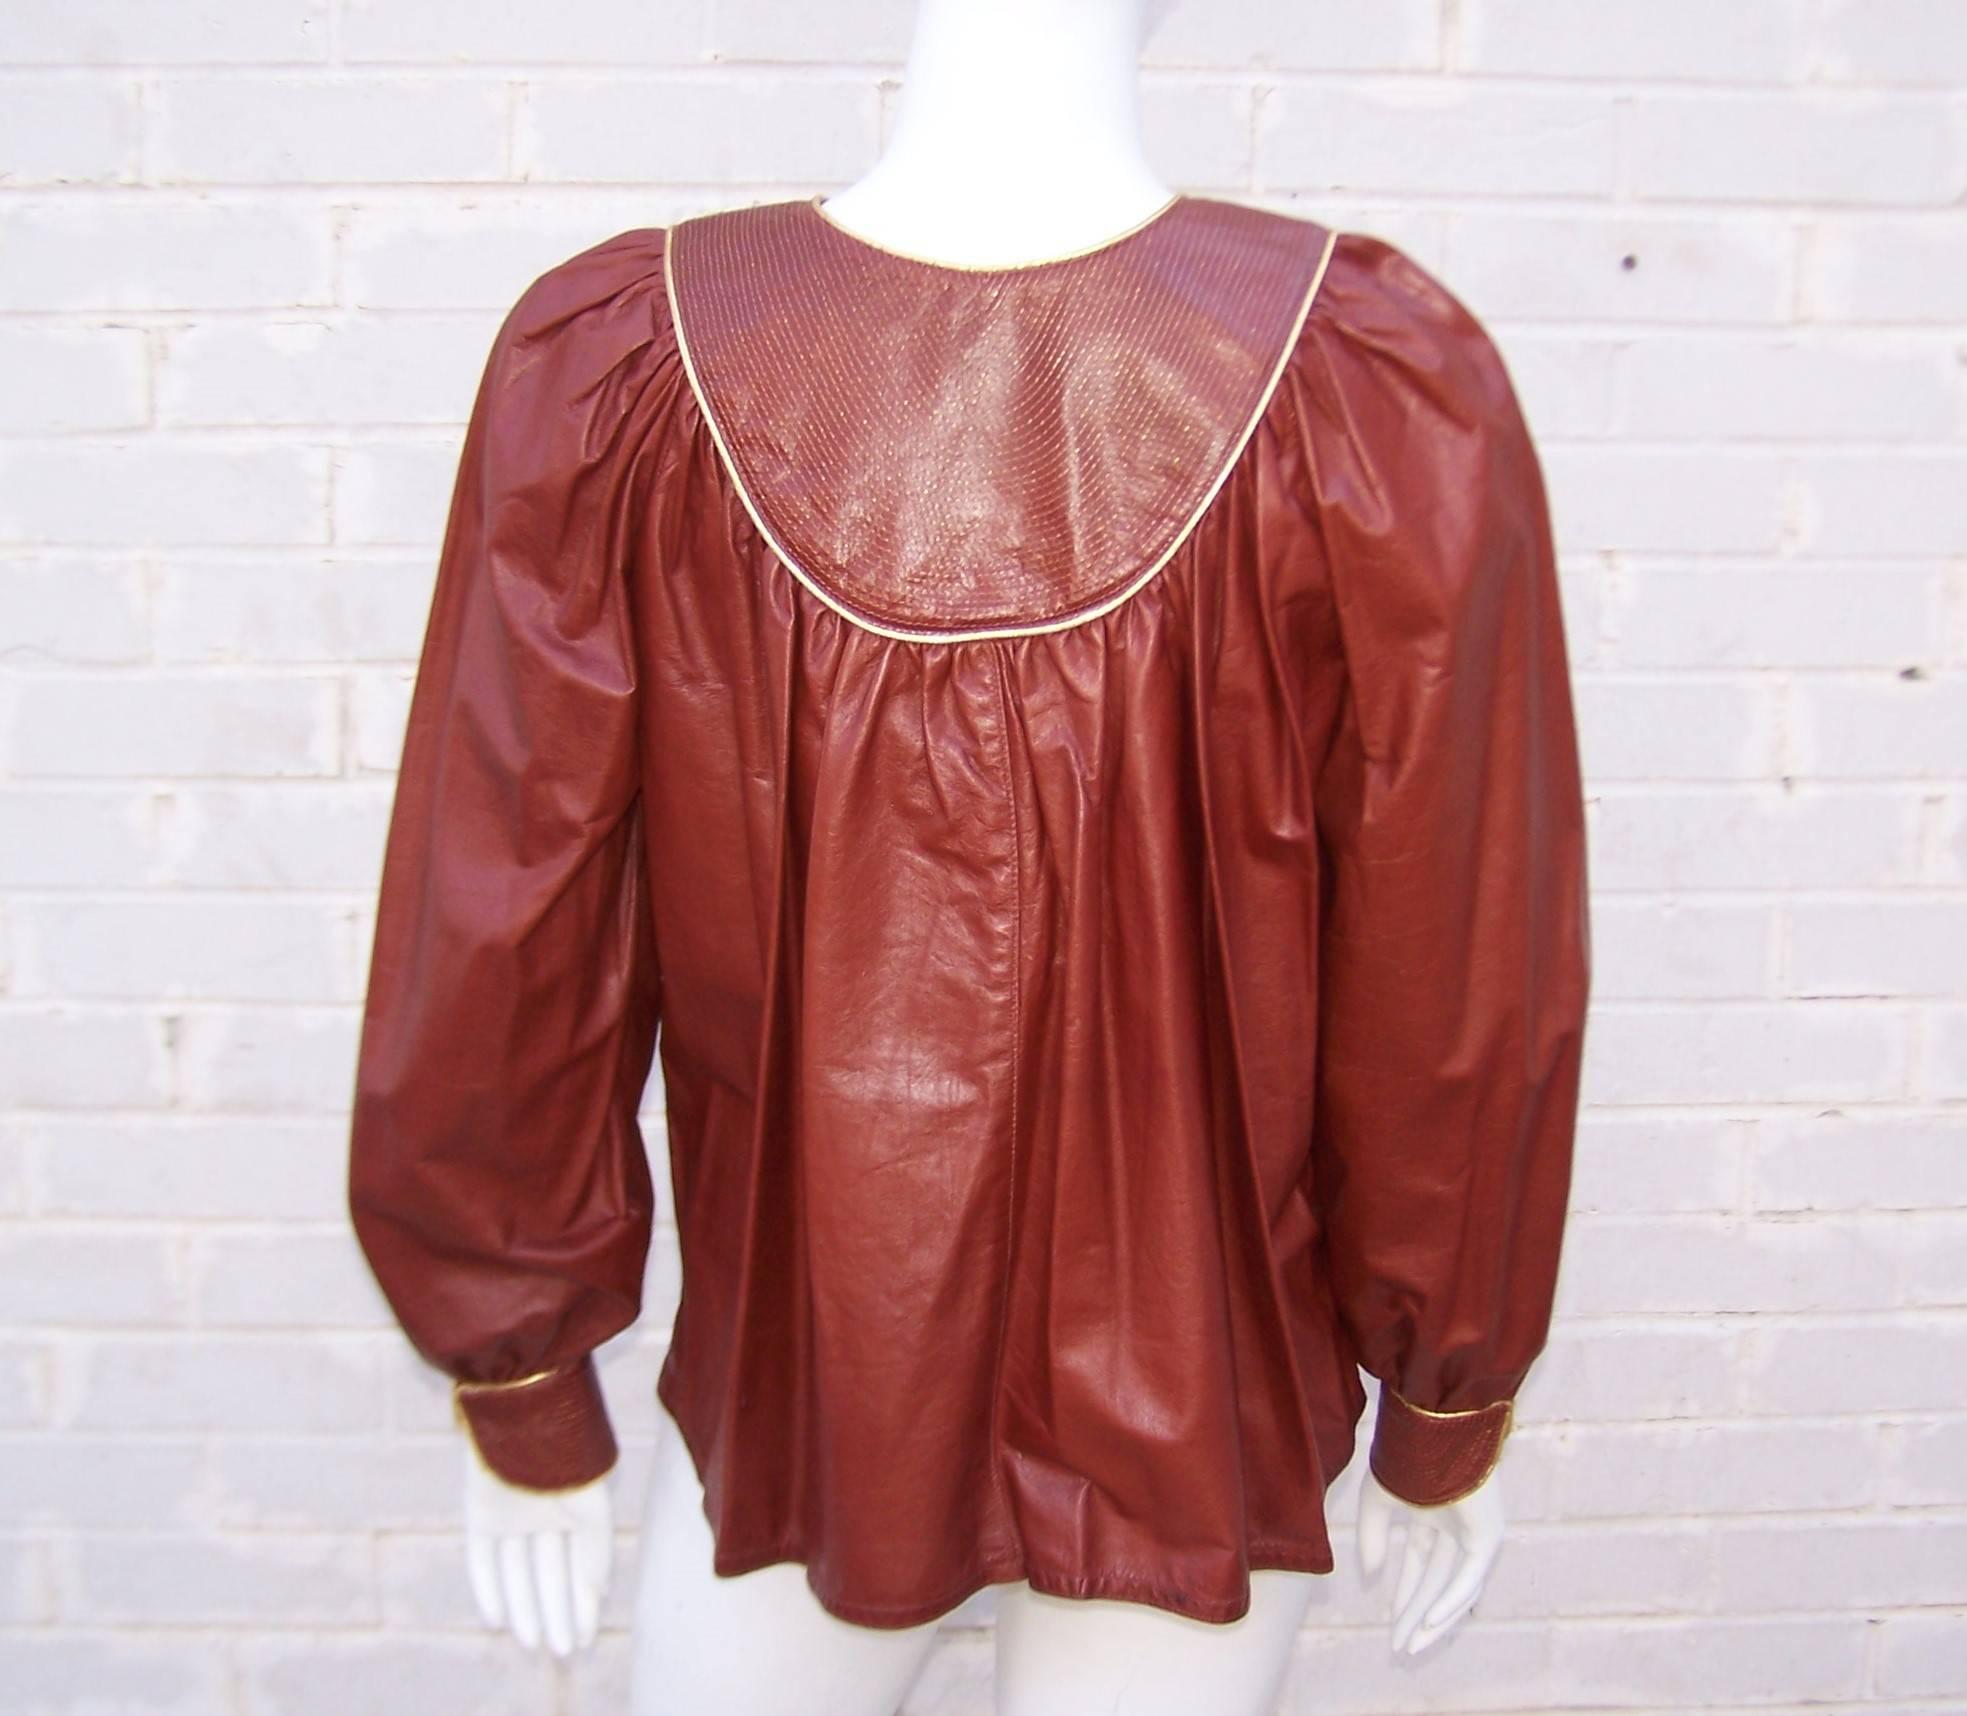 Women's 1970's Geoffrey Beene Oxblood Leather Smock Top With Gold Stitching